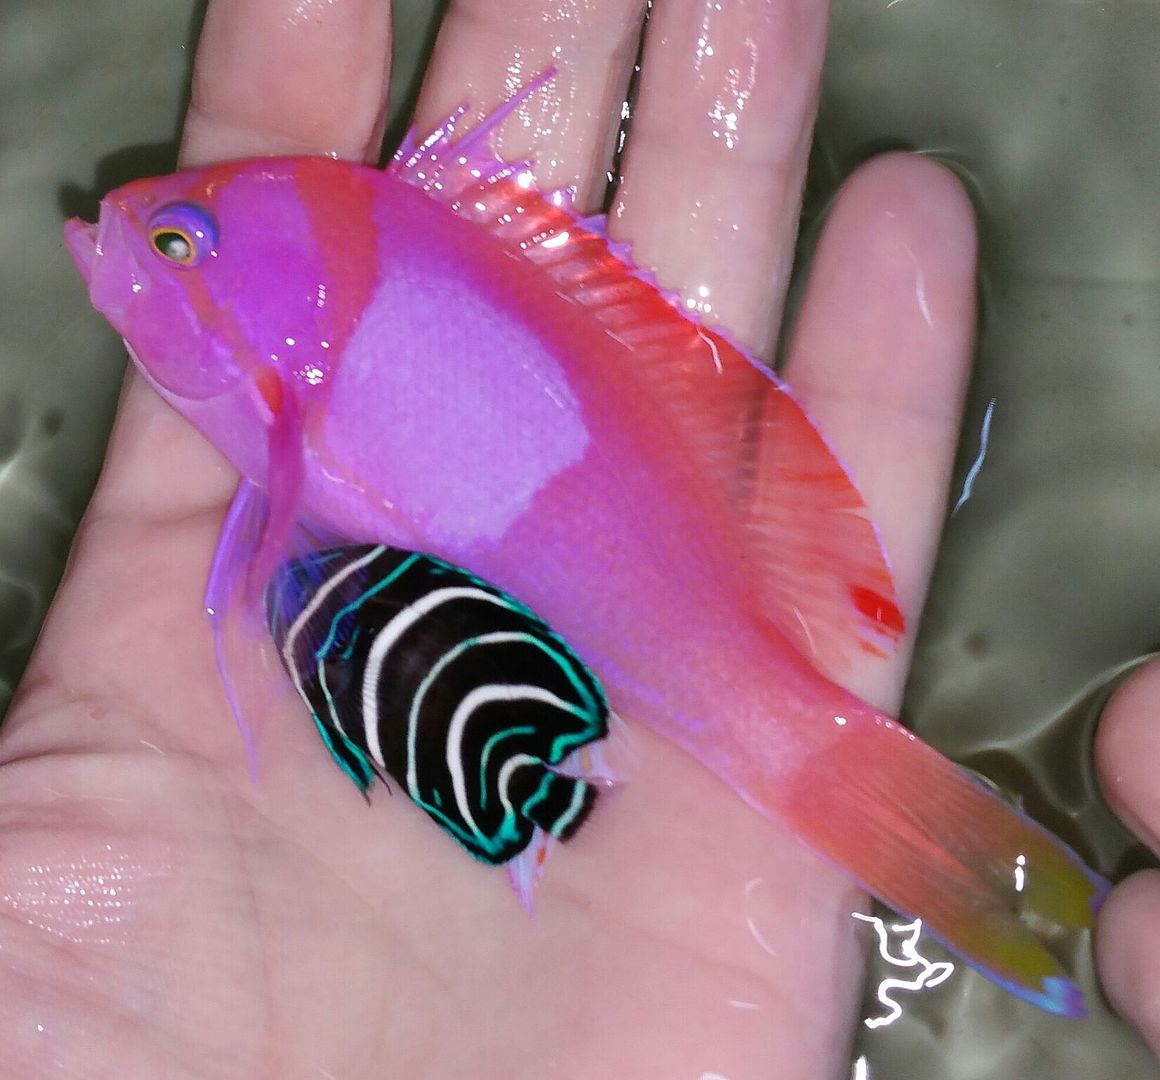 unspecified zpsxqrecmio - Awesome Fish n More! Pics & Prices! Only @ Tropicorium!!!